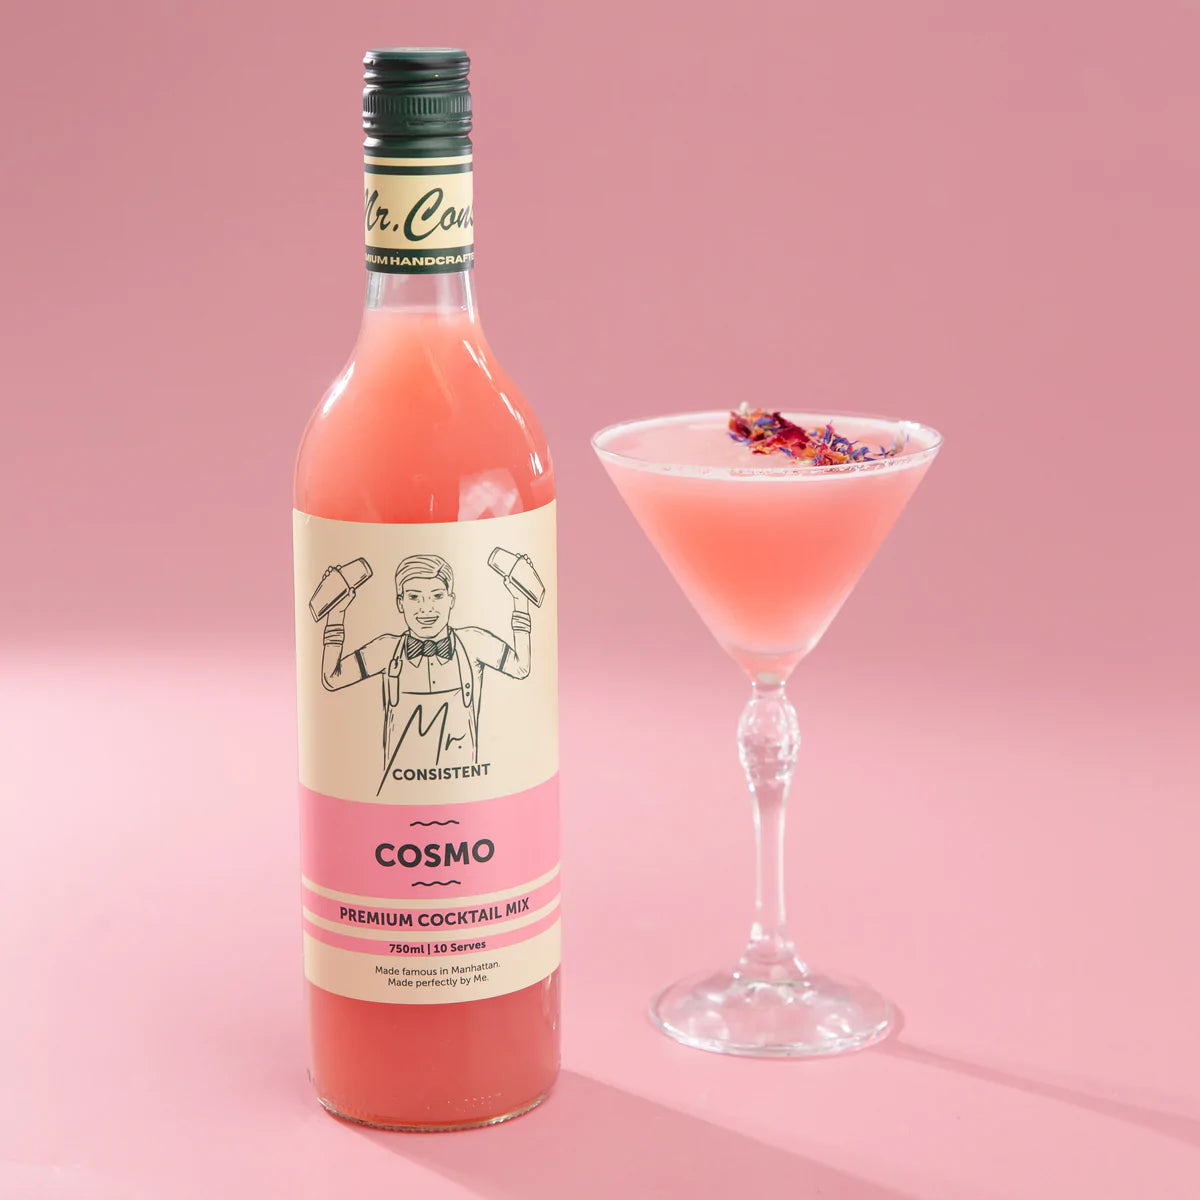 Mr Consistent Cocktail Range - Cosmo | Cocktail Mix